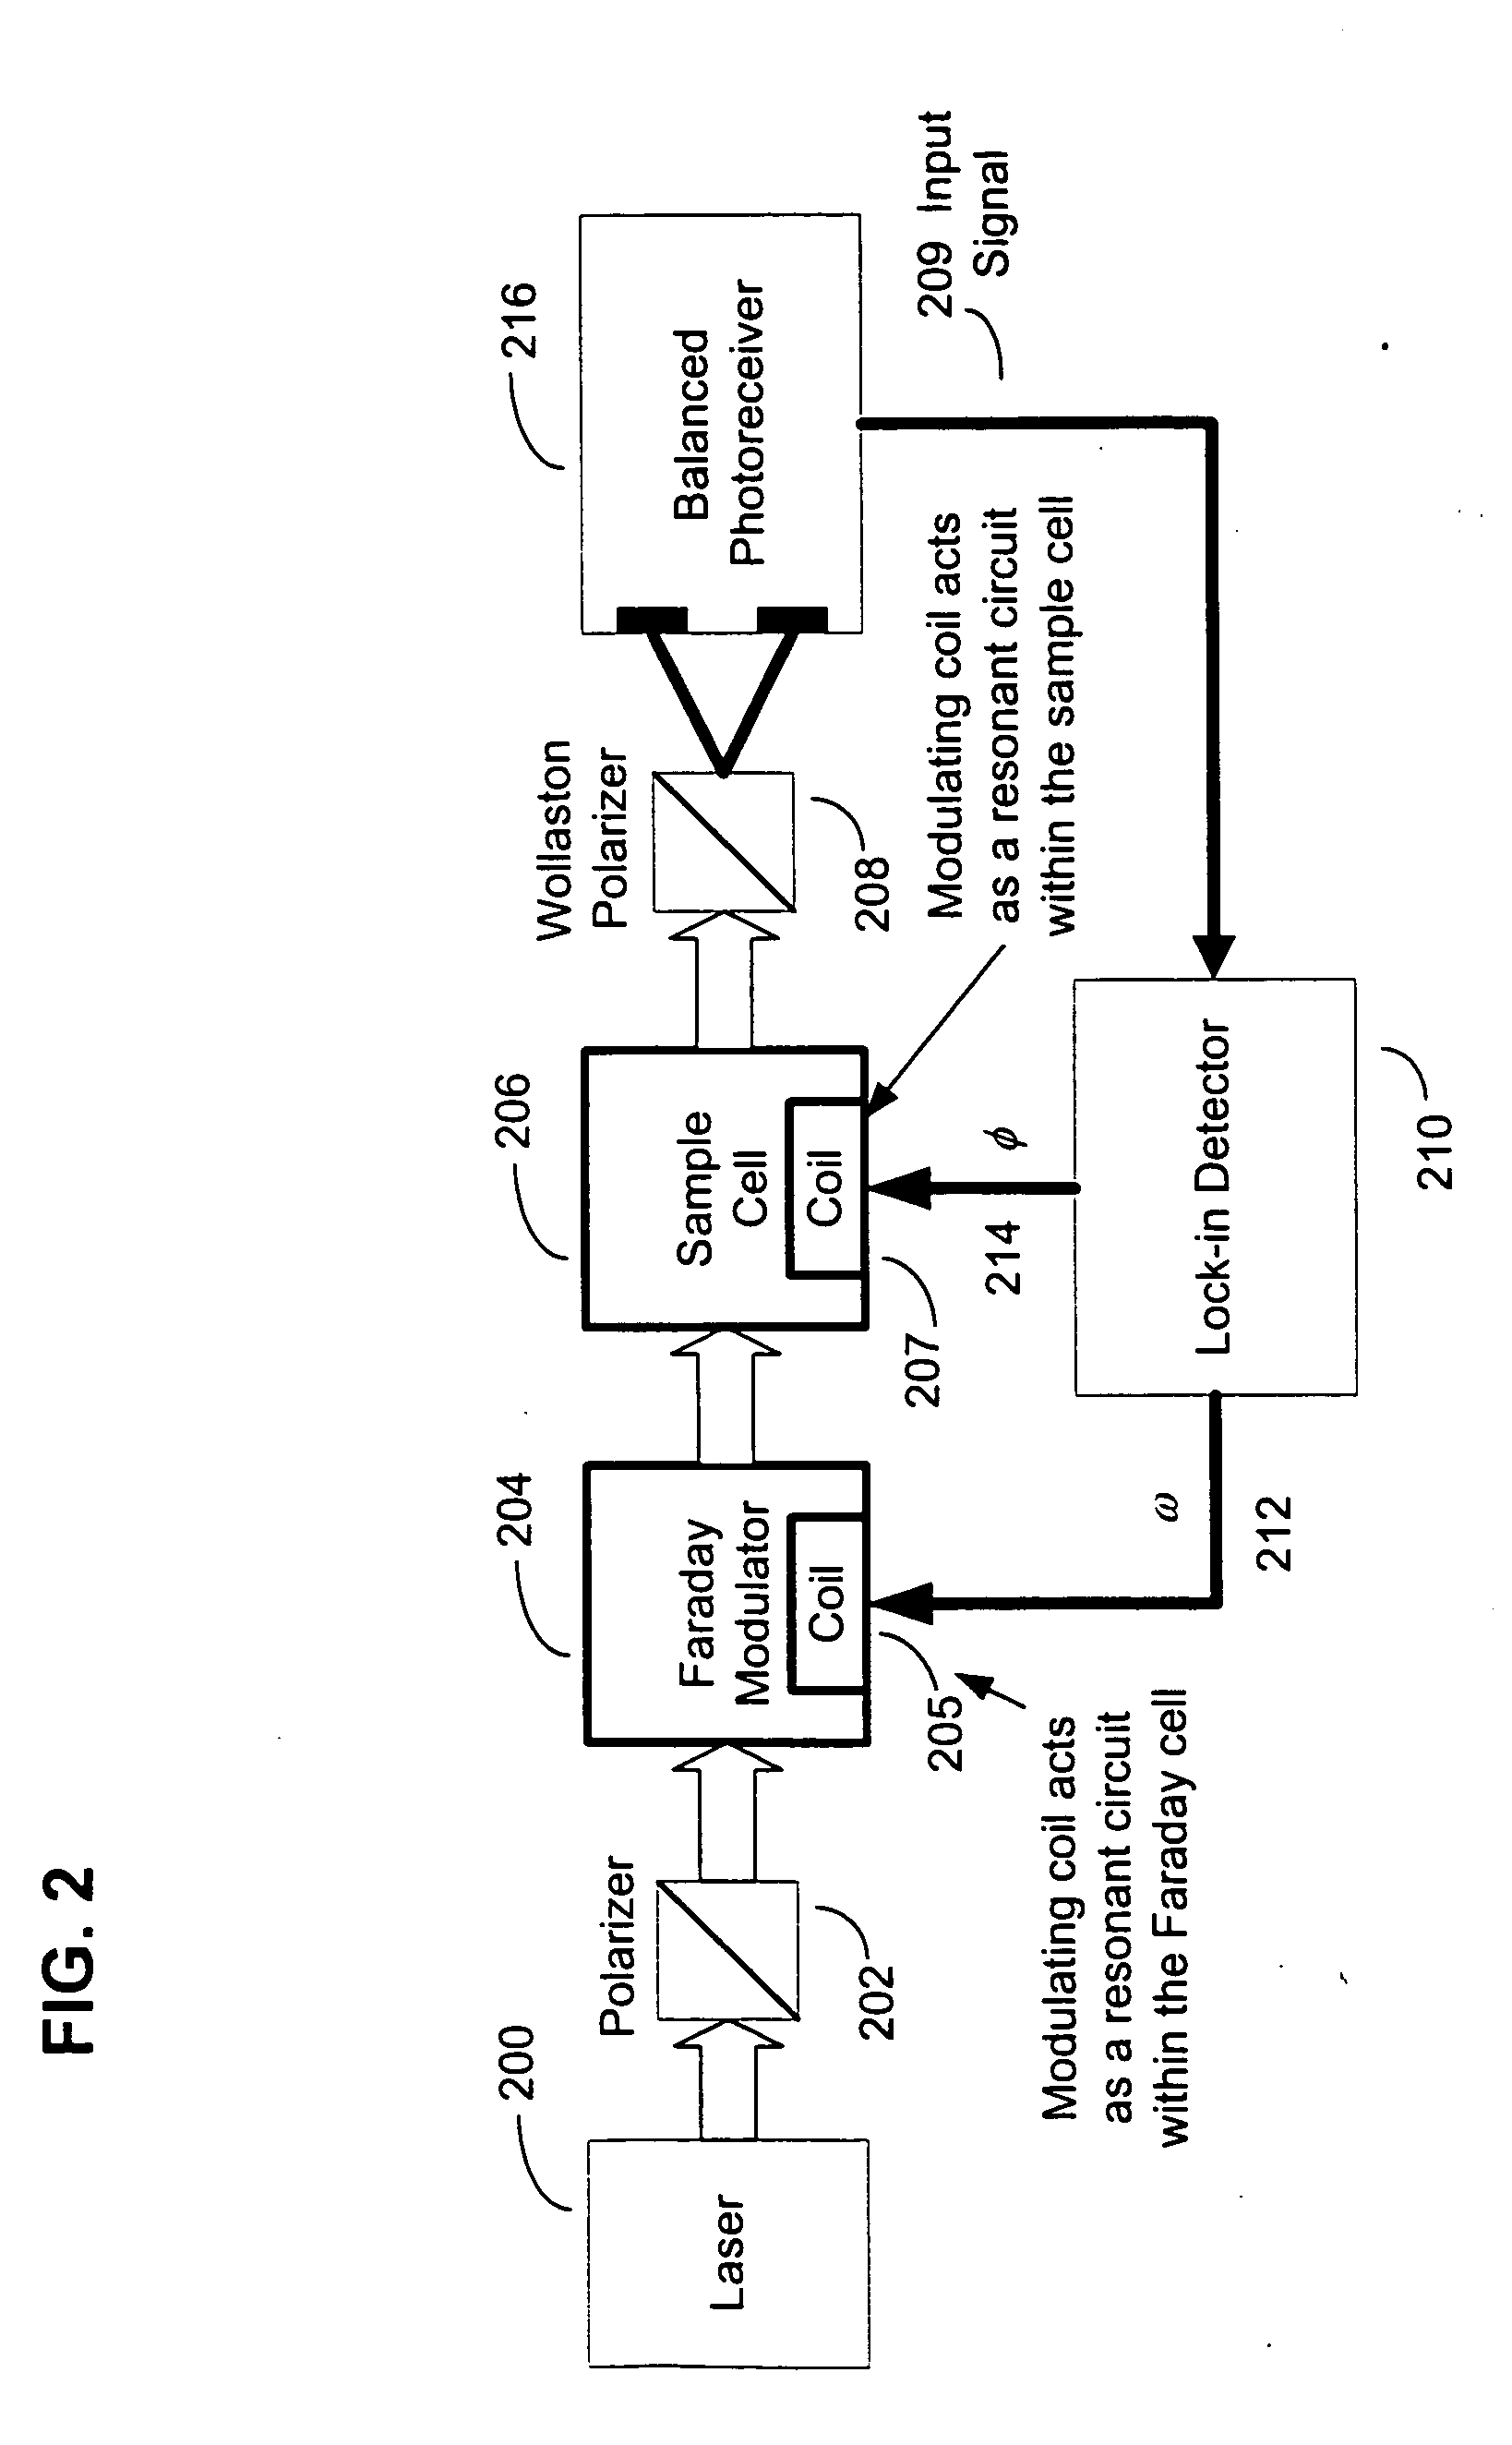 Systems and methods for automated resonant circuit tuning